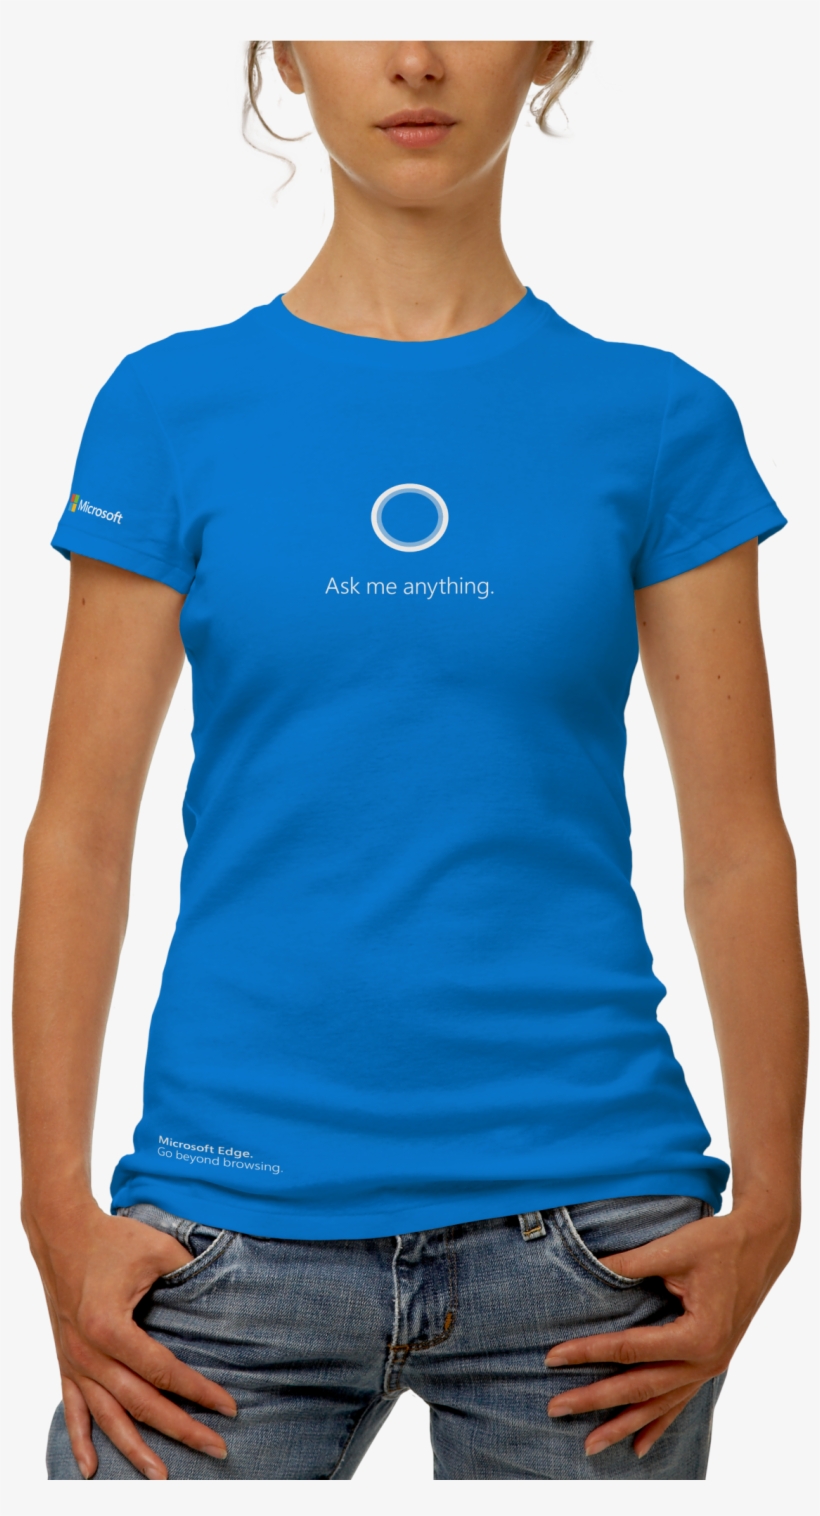 Messaging With A Touch Of Humour - Microsoft Pride T Shirt, transparent png #1948163